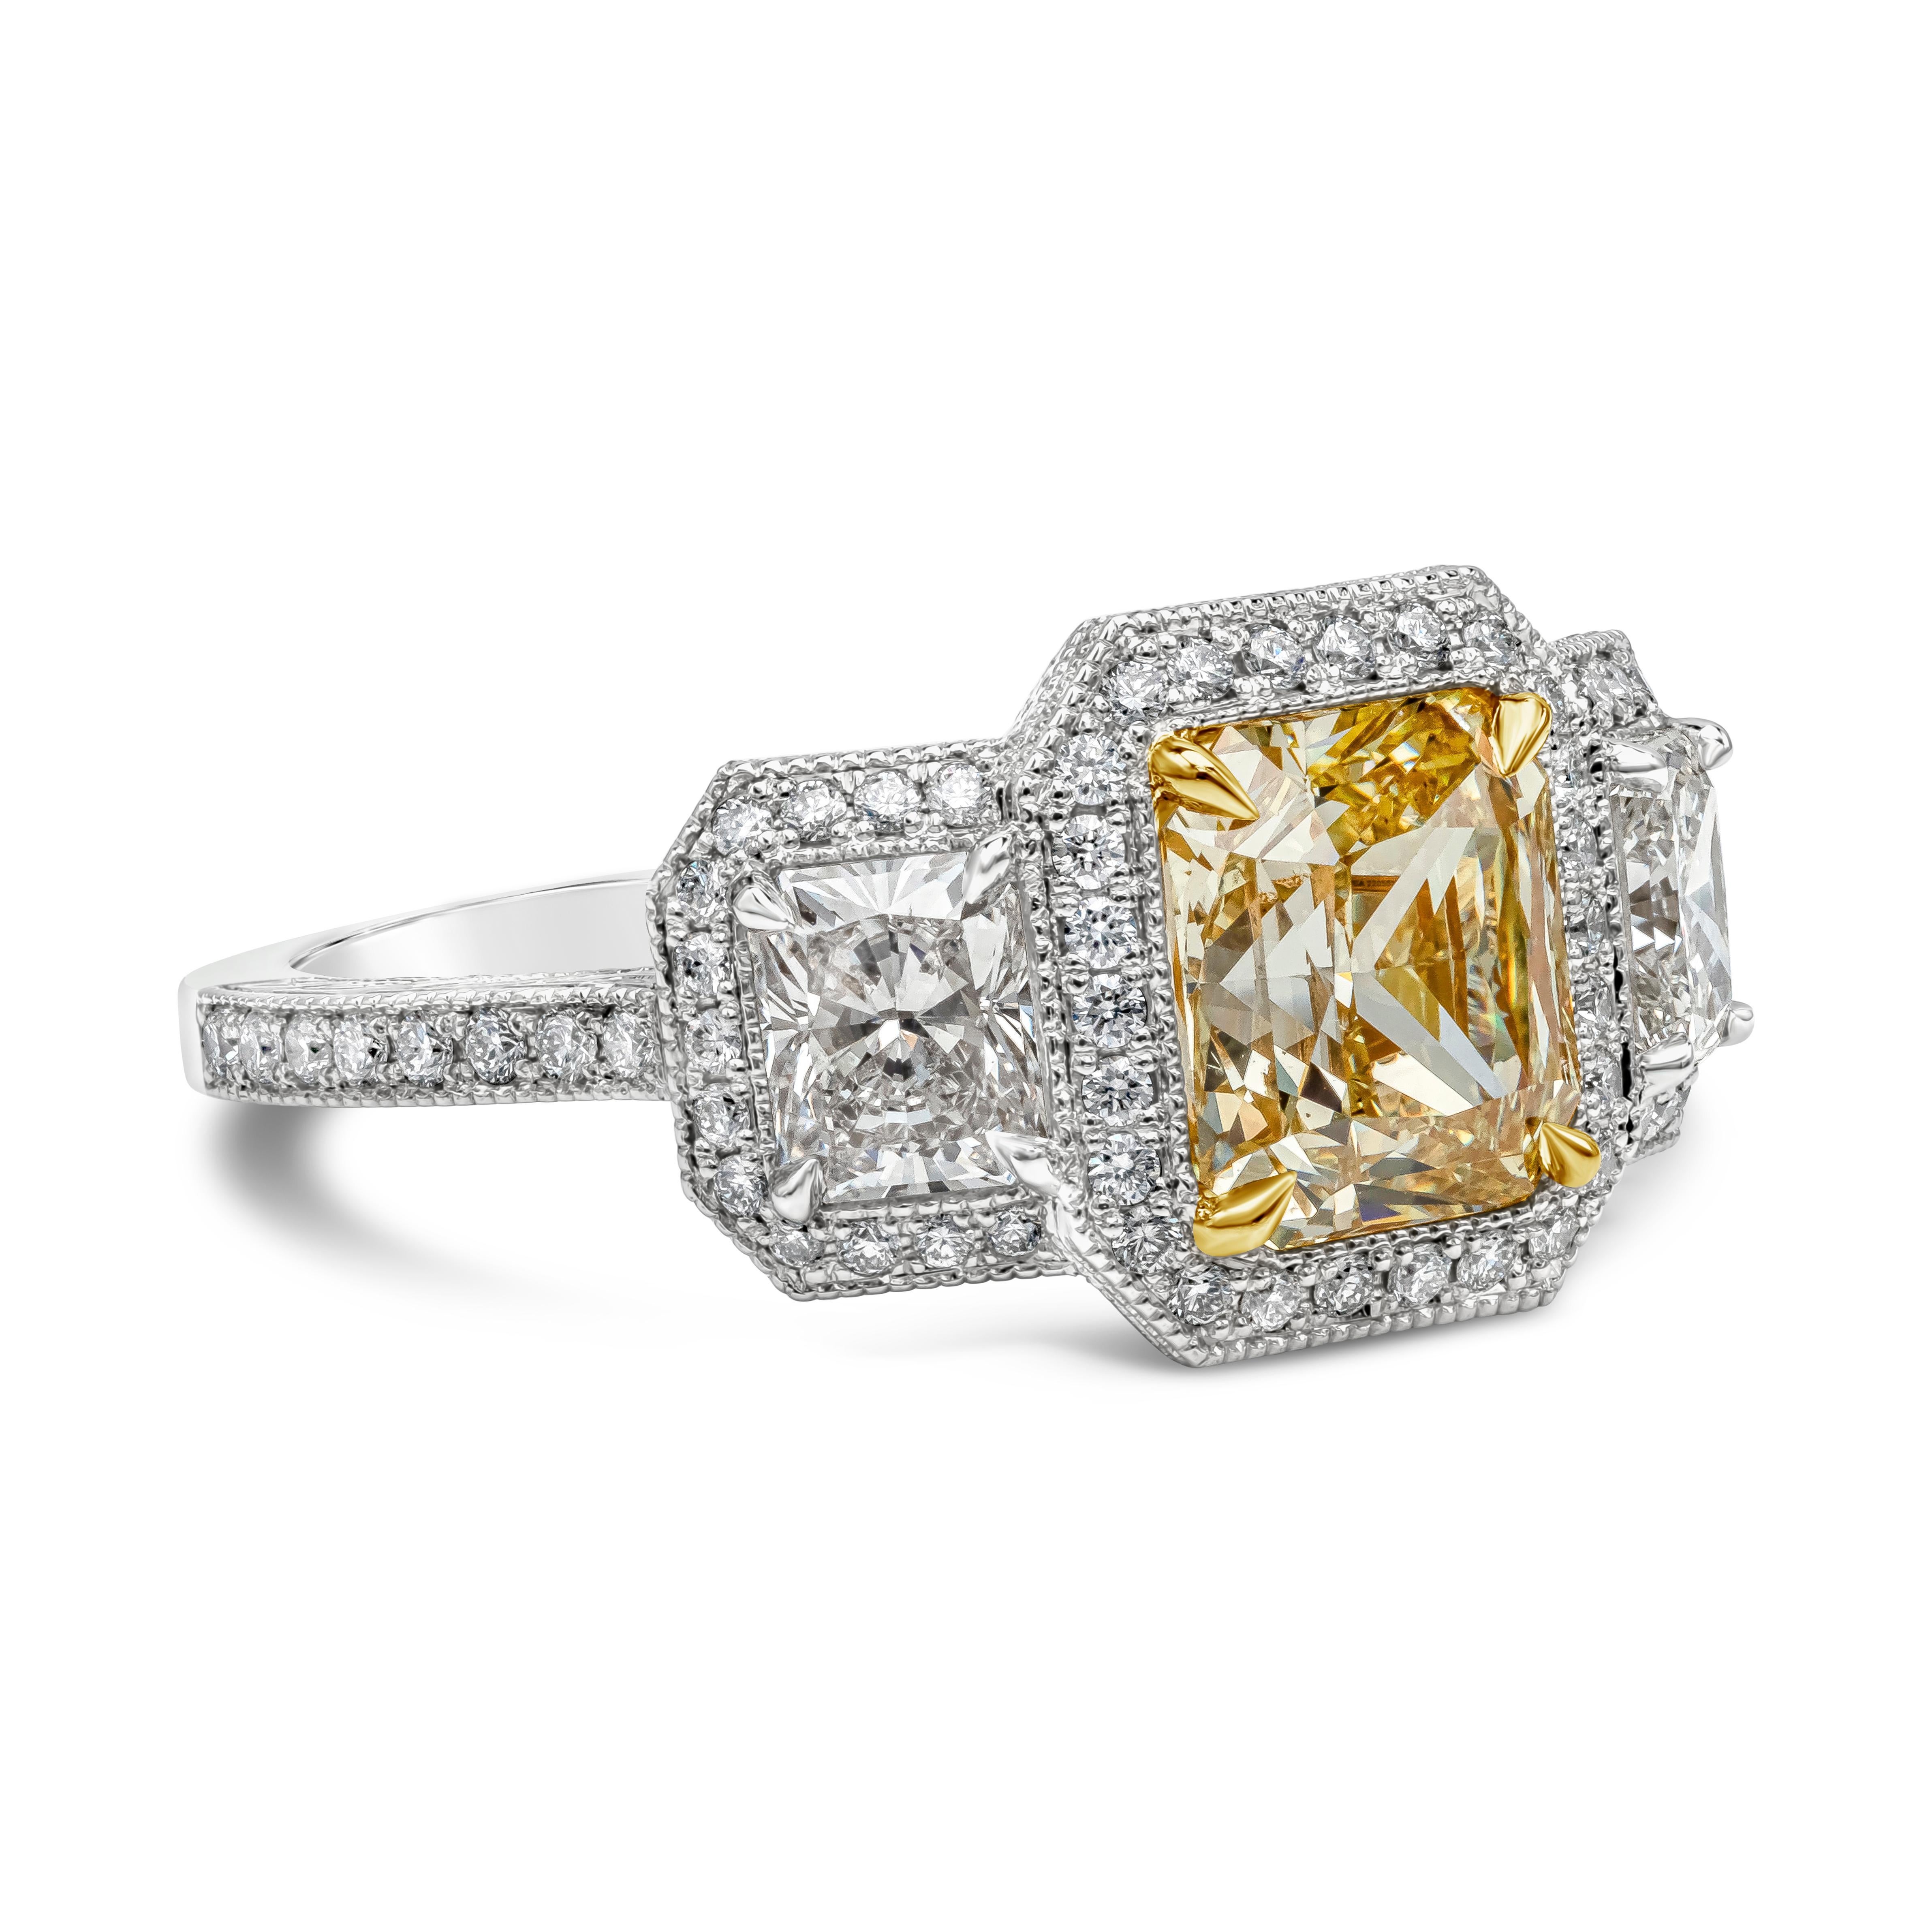 A unique handcrafted engagement ring showcasing a 1.96 carats radiant cut yellow diamond certified by GIA as Fancy Yellow color, SI1 in clarity, set in a four prong 18k yellow gold basket setting. Flanking the center diamond are two radiant cut